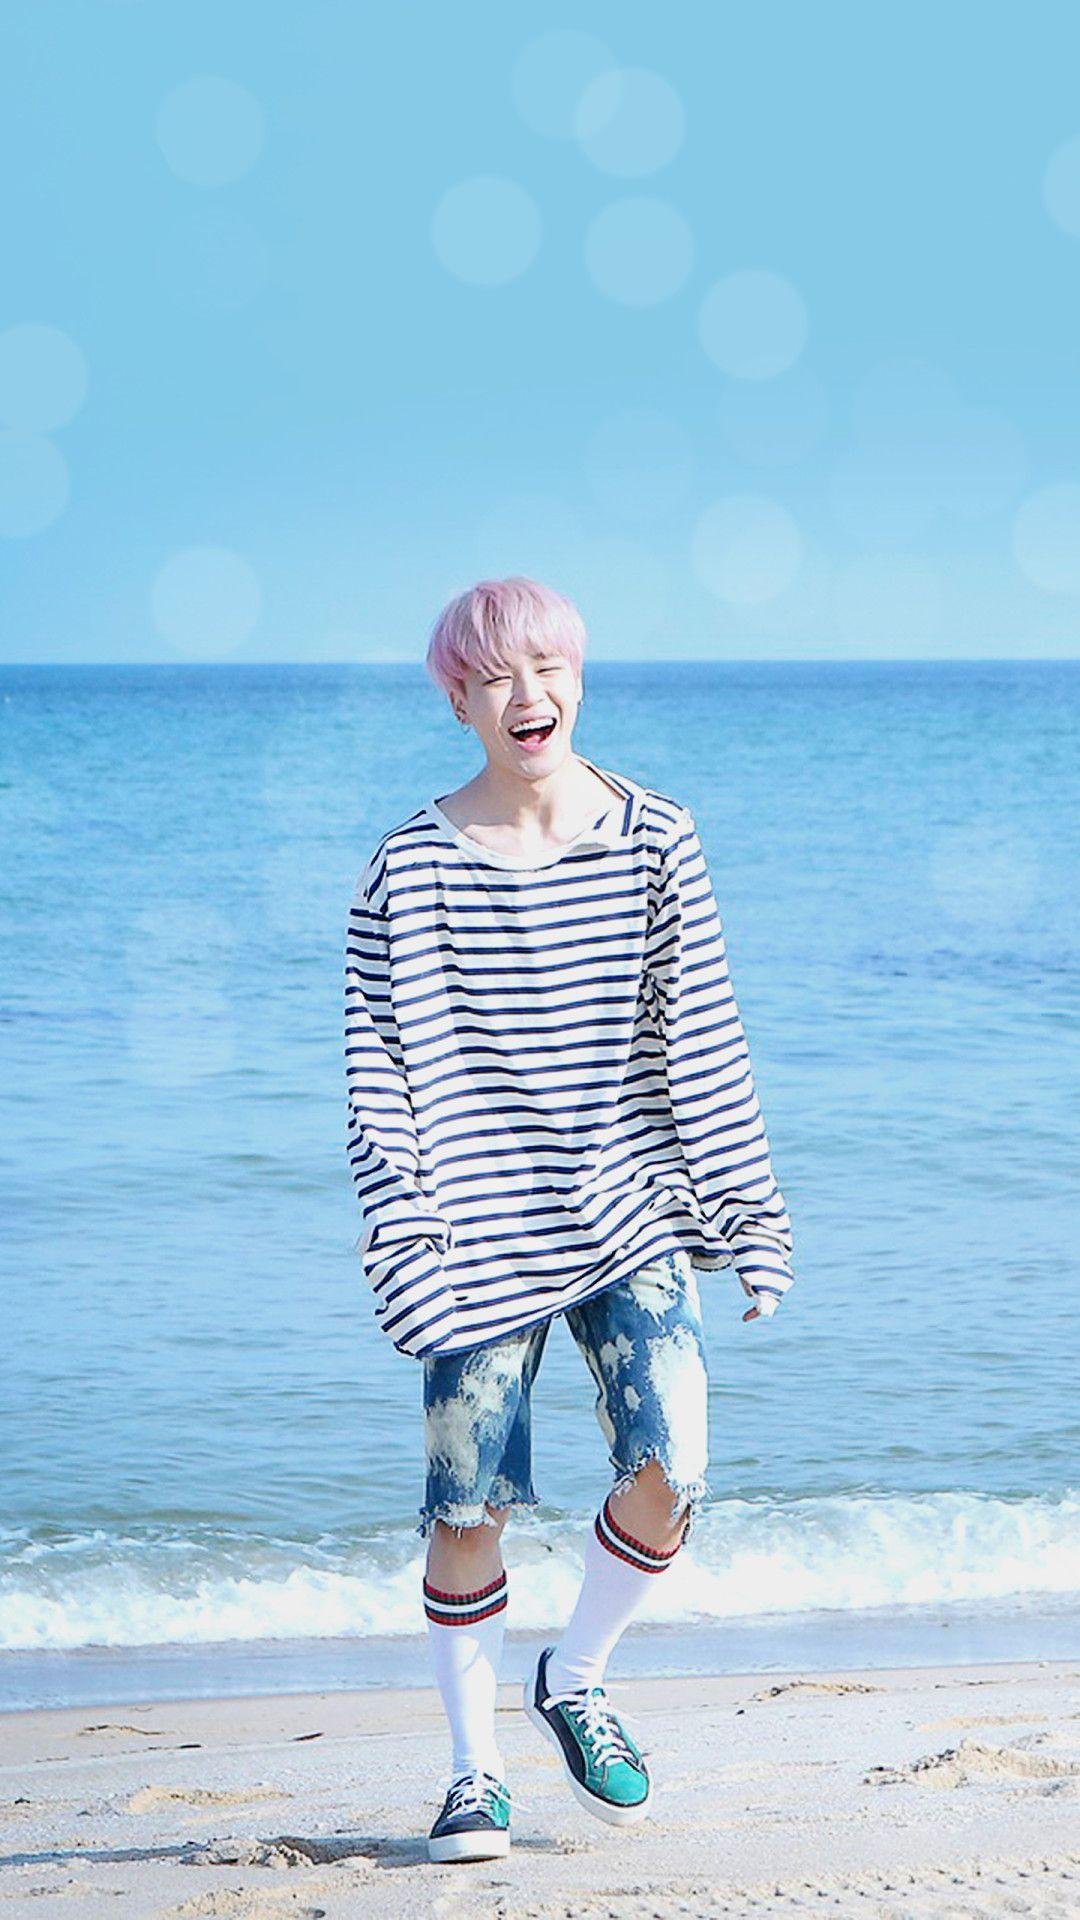 Spring Day Song By Bts Wallpapers Download | Mobcup